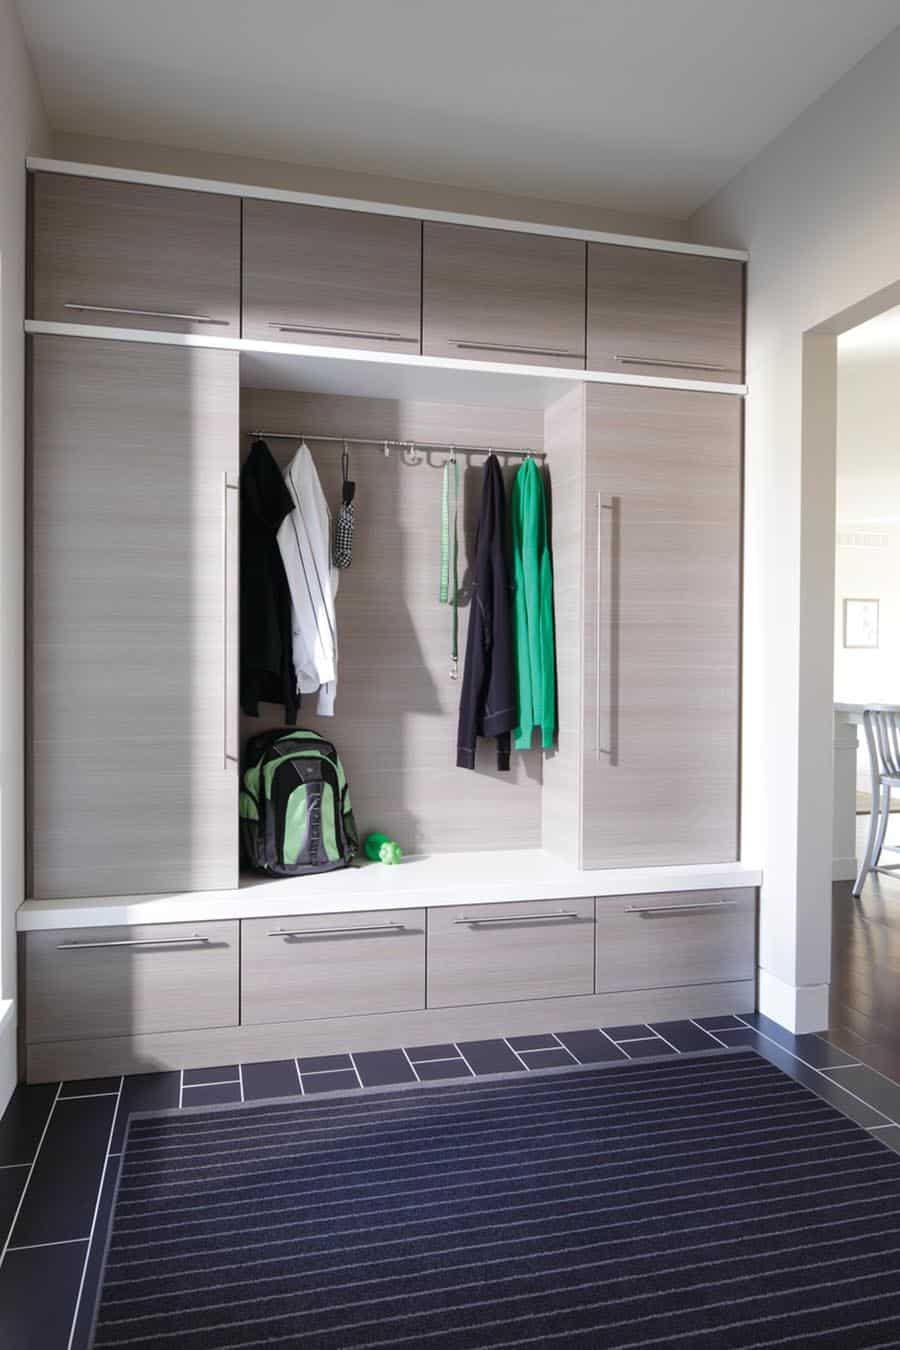 Do 3 - using vertical space in a new albany mudroom | Innovate Home Org | Storage Organization for Mudroom | Laundry room storage | Entryway storage